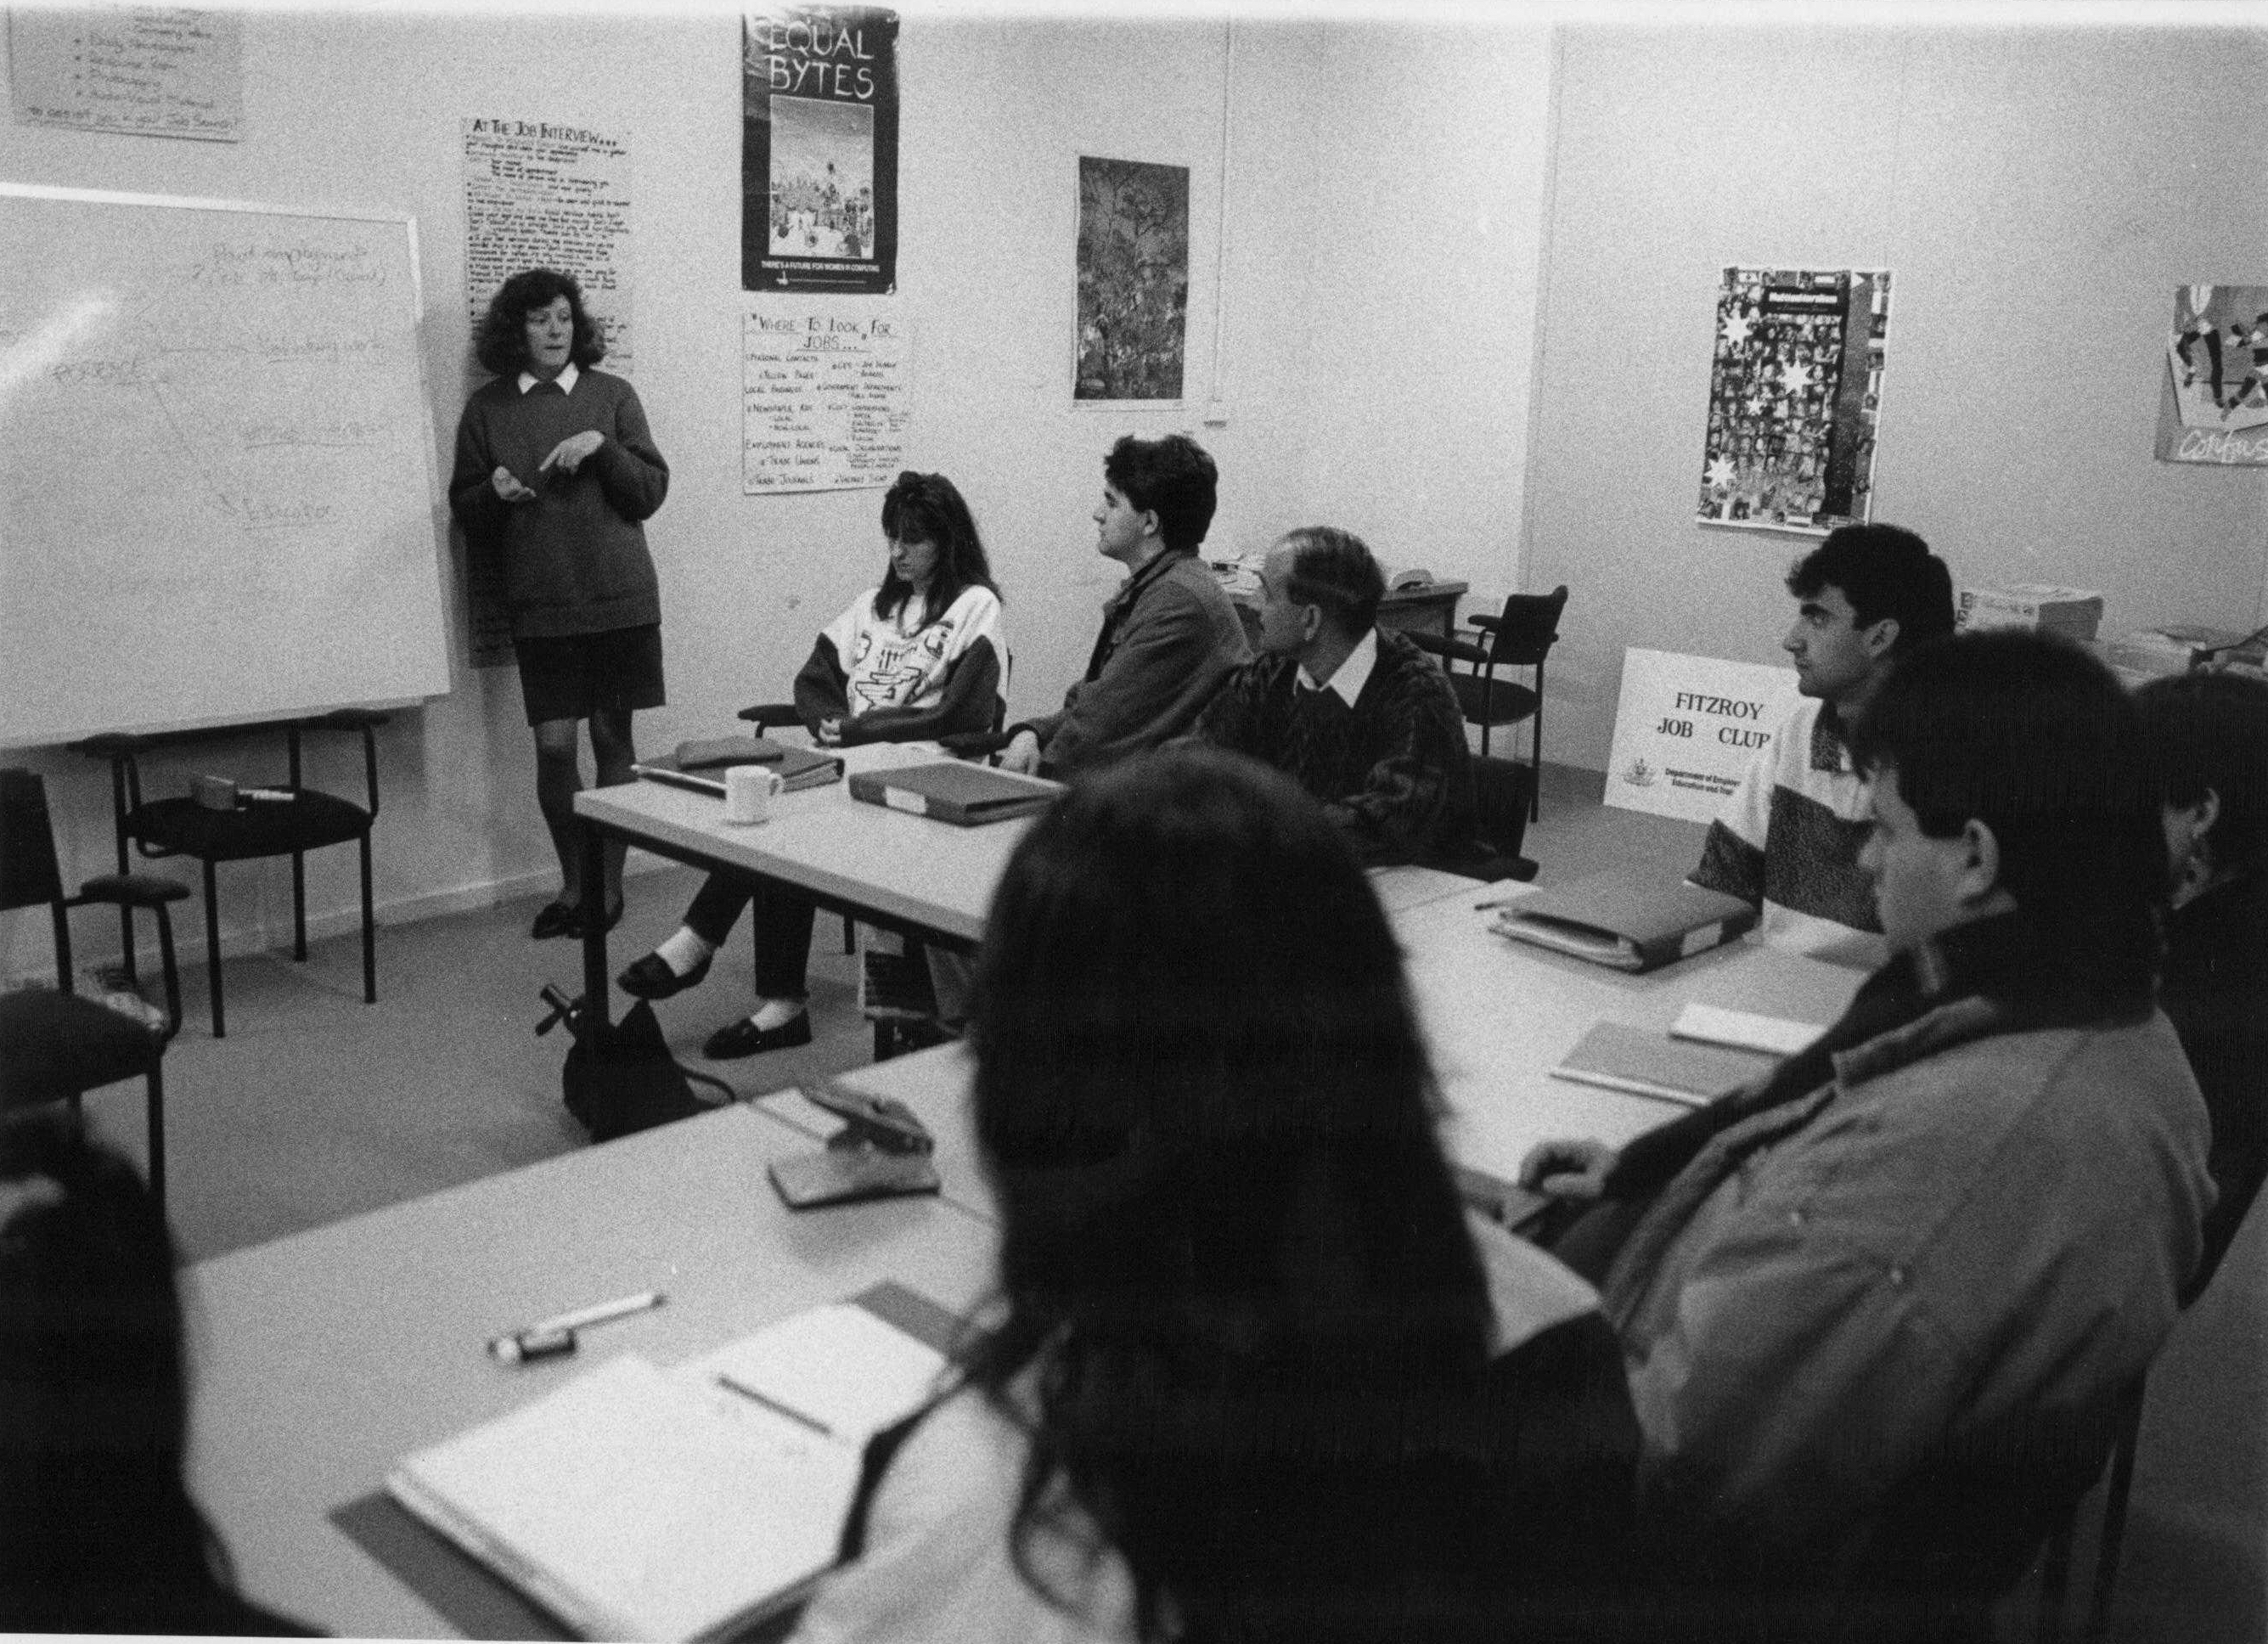 This is a black and white photo of an employment officer teaching job seekers. There are about 10 people listening to the employment officer. She is standing in front of a whiteboard.